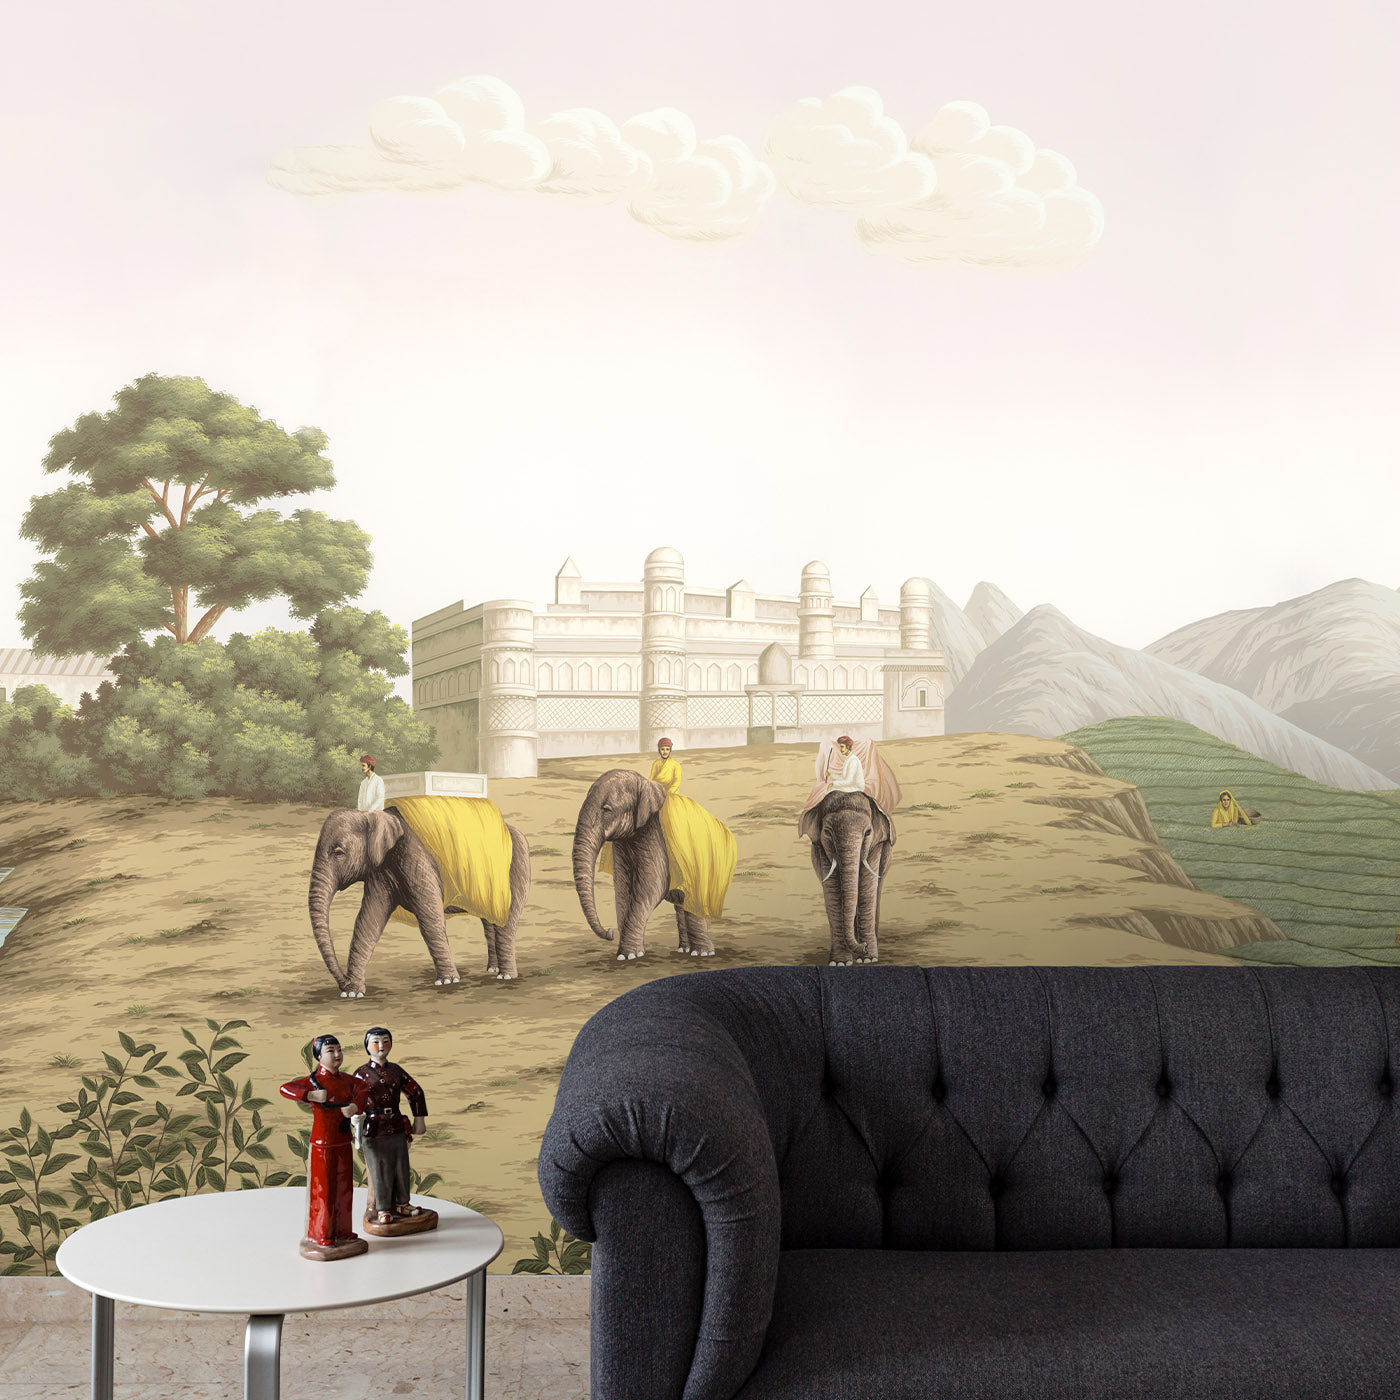 The Tea Route in Colourful Wallpaper - Alternative view 1